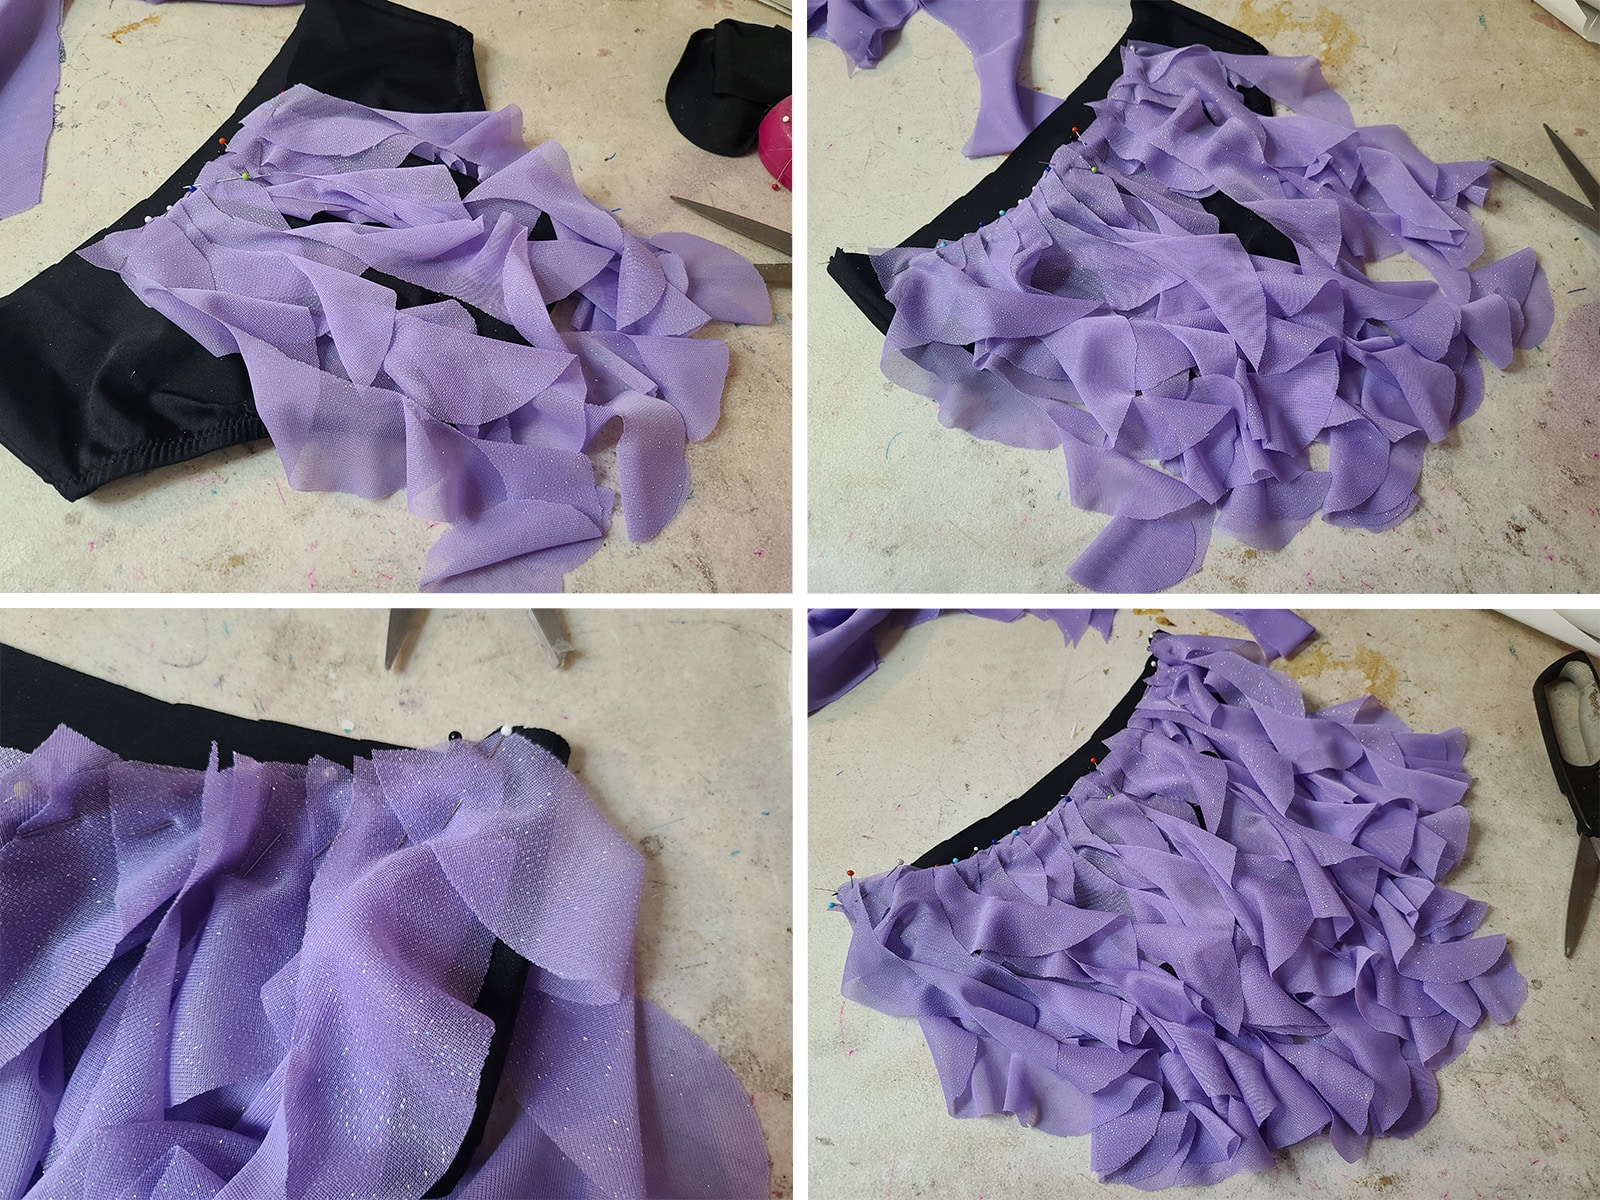 A 4 part image showing light purple ruffles pinned to the waist of a black brief.